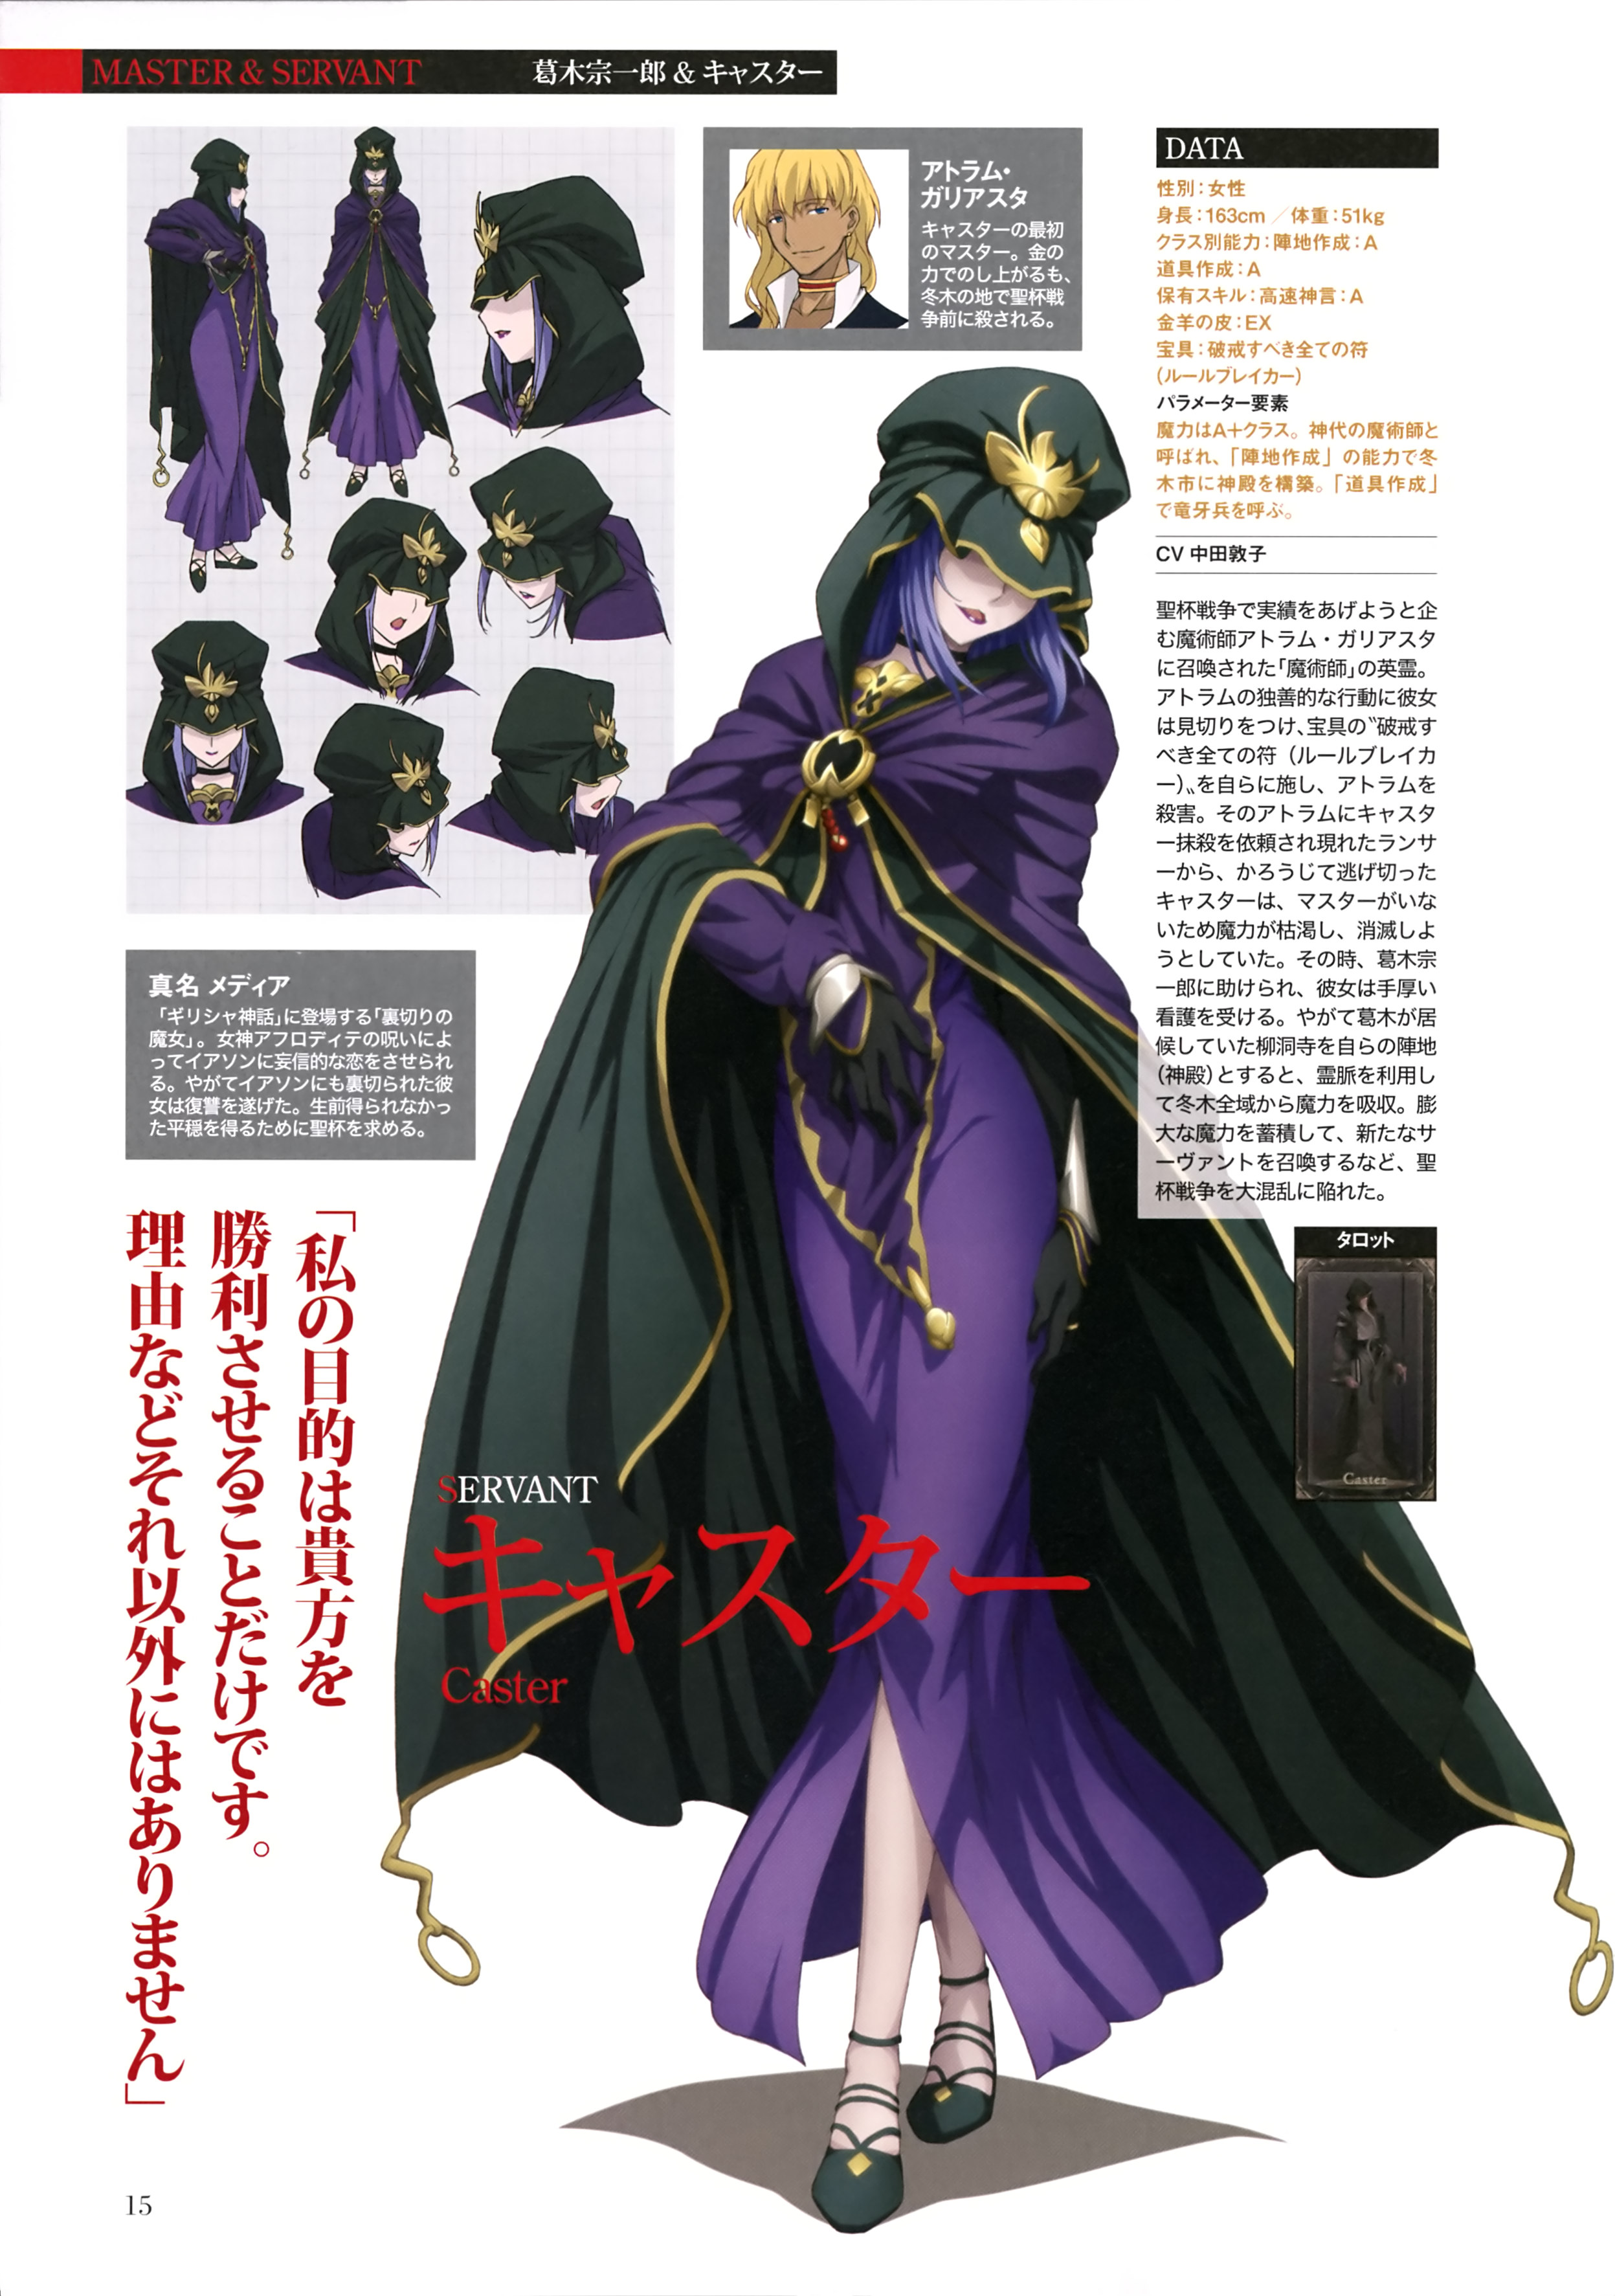 Fate Stay Night Caster Character Design Dress Expression Yande Re